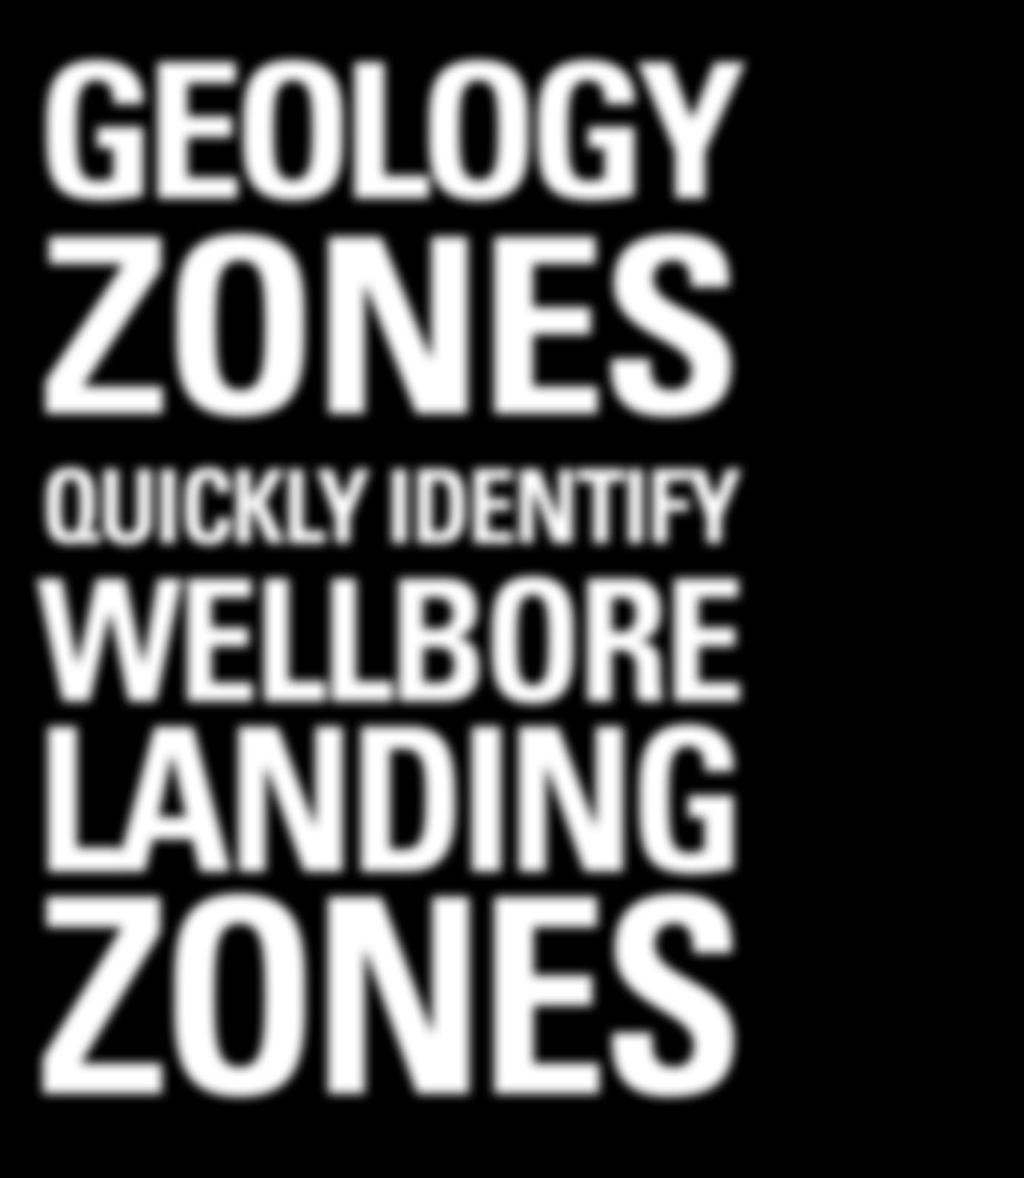 GEOLOGY ZONES QUICKLY IDENTIFY CLEARFORK UPPER SPRABERRY LOWER SPRABERRY